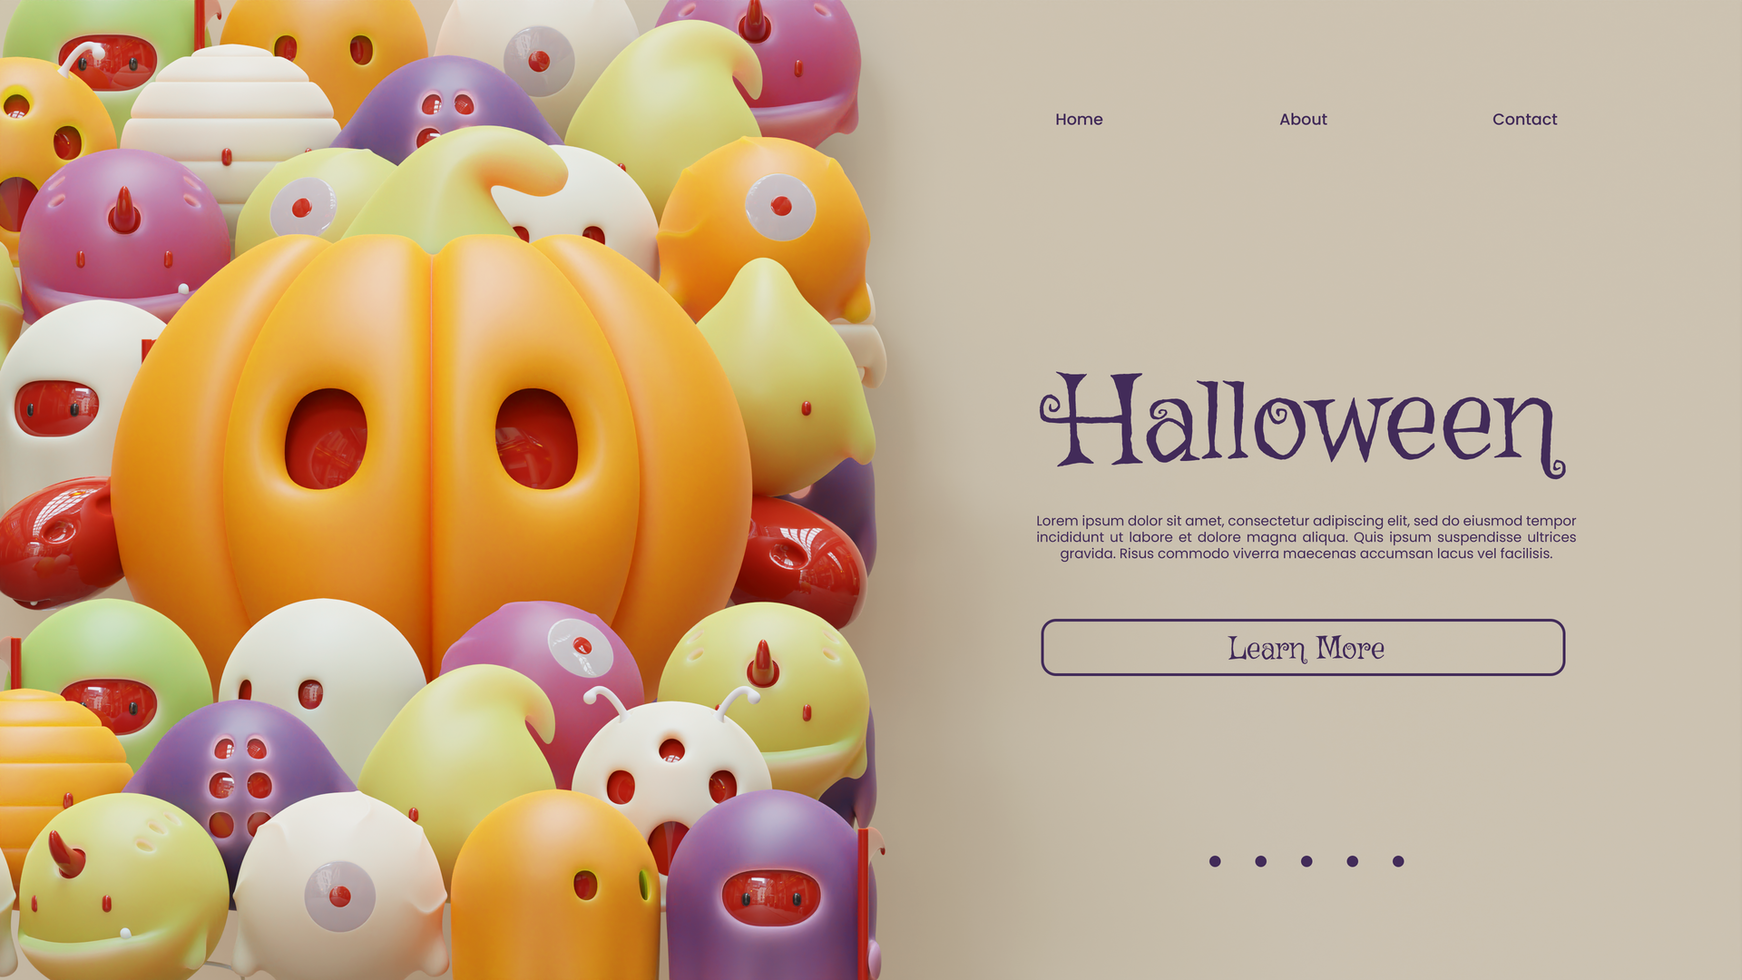 Landing Page Template With Halloween 3D Render Illustration psd